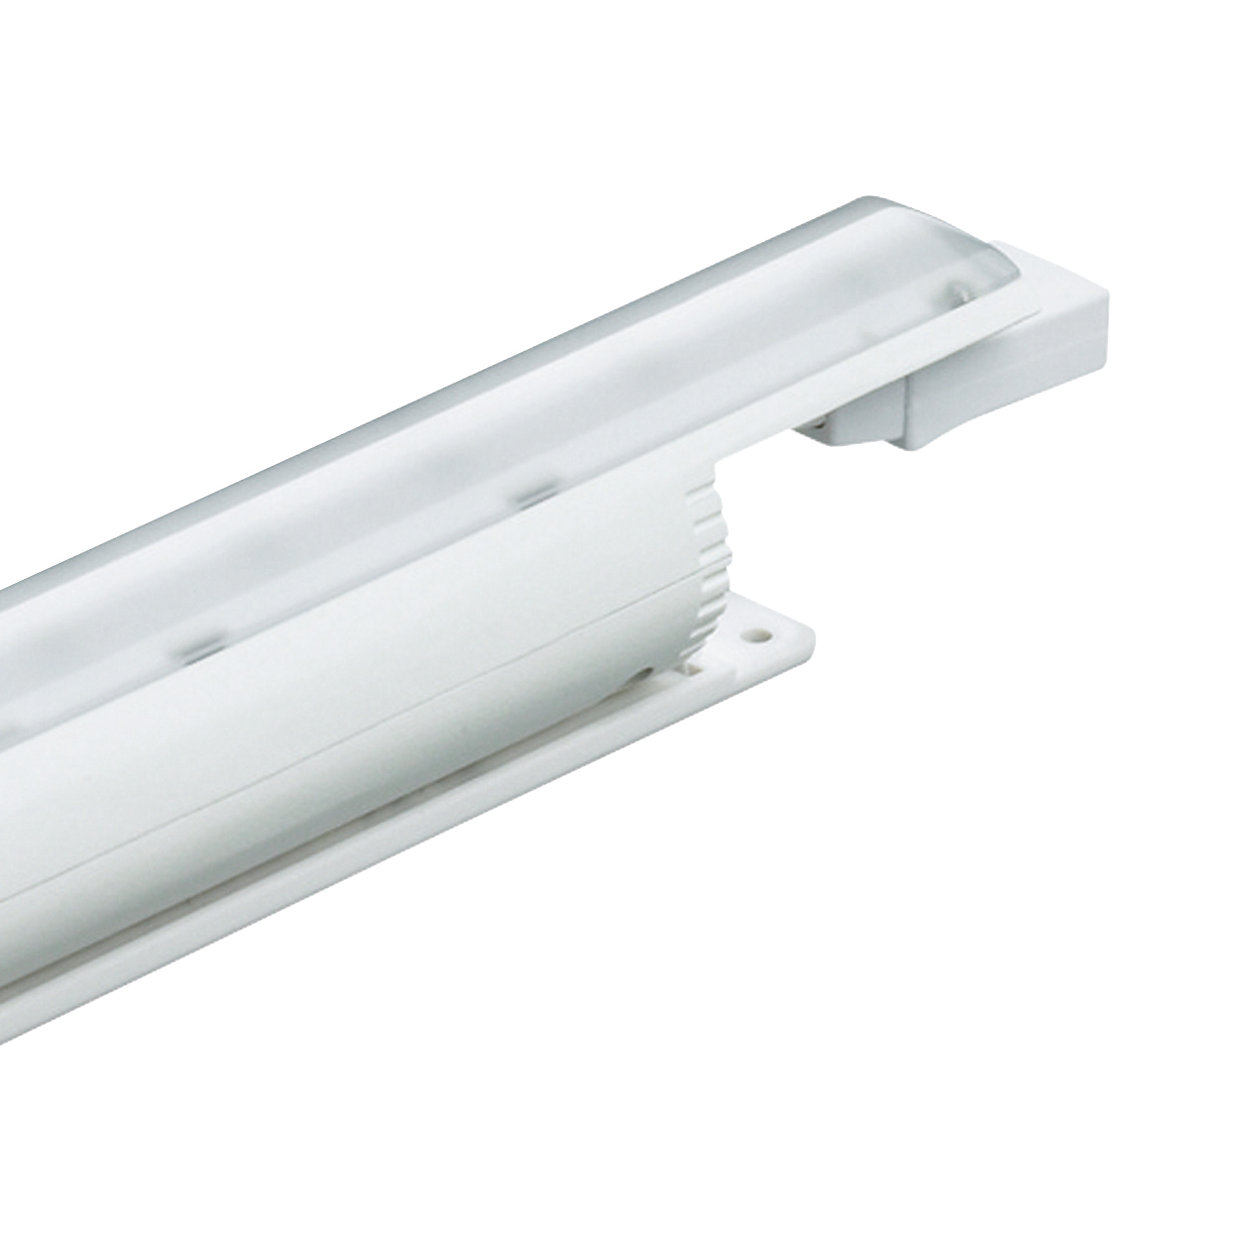 eW Cove MX Powercore – maximum-output linear LED fixture for cove, general and accent lighting